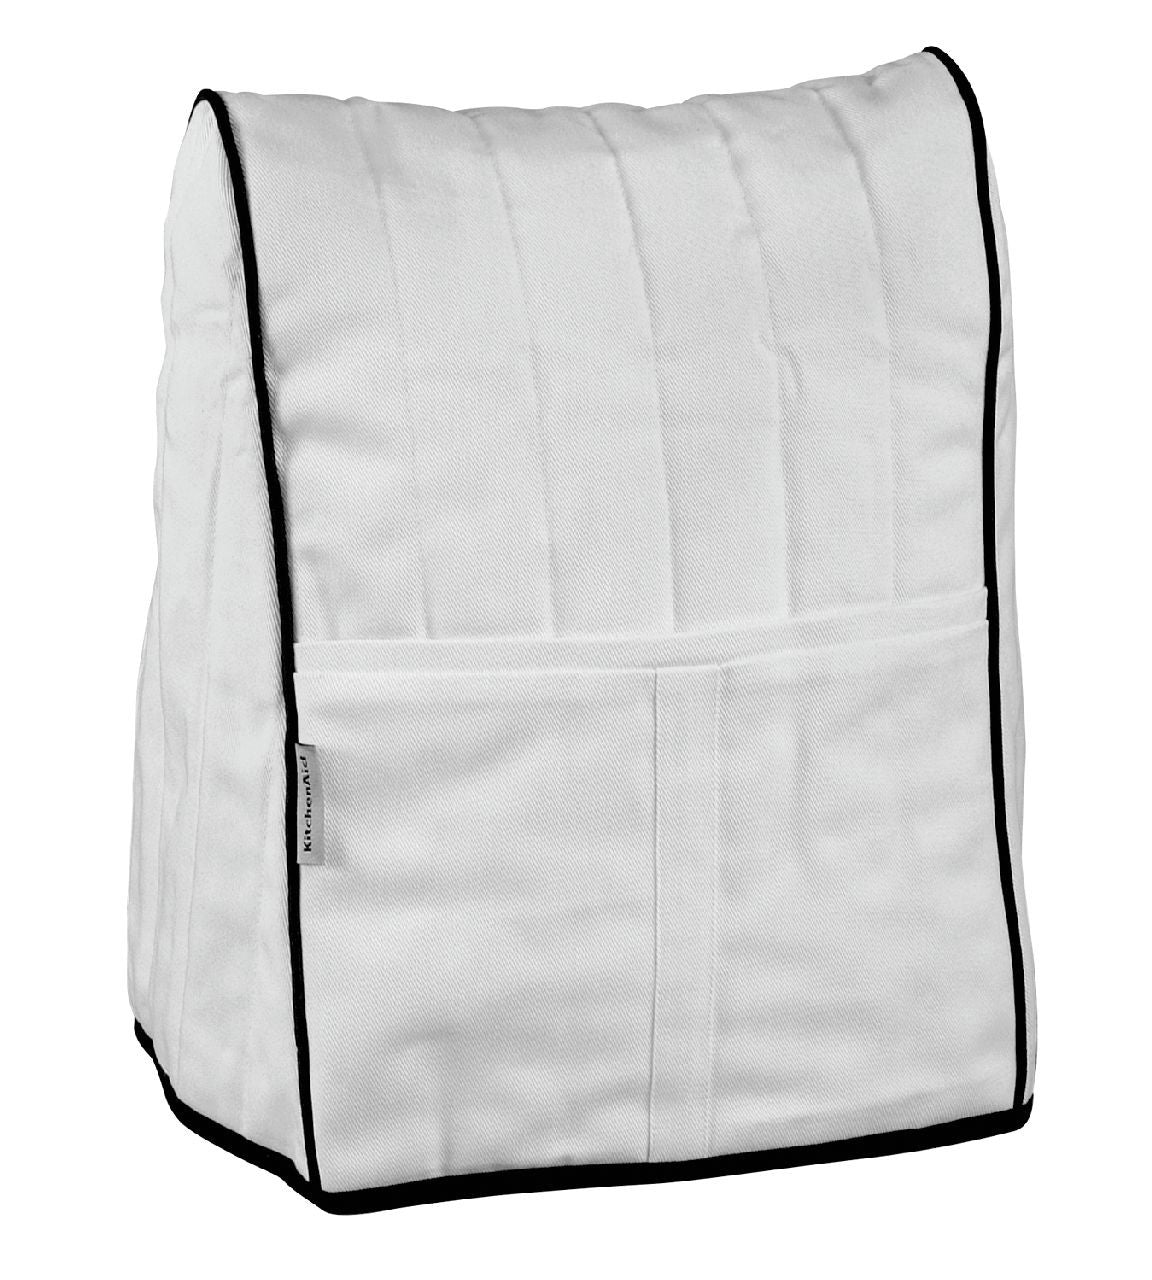 Kitchenaid Cloth Cover White With Black Piping KMCC1WH